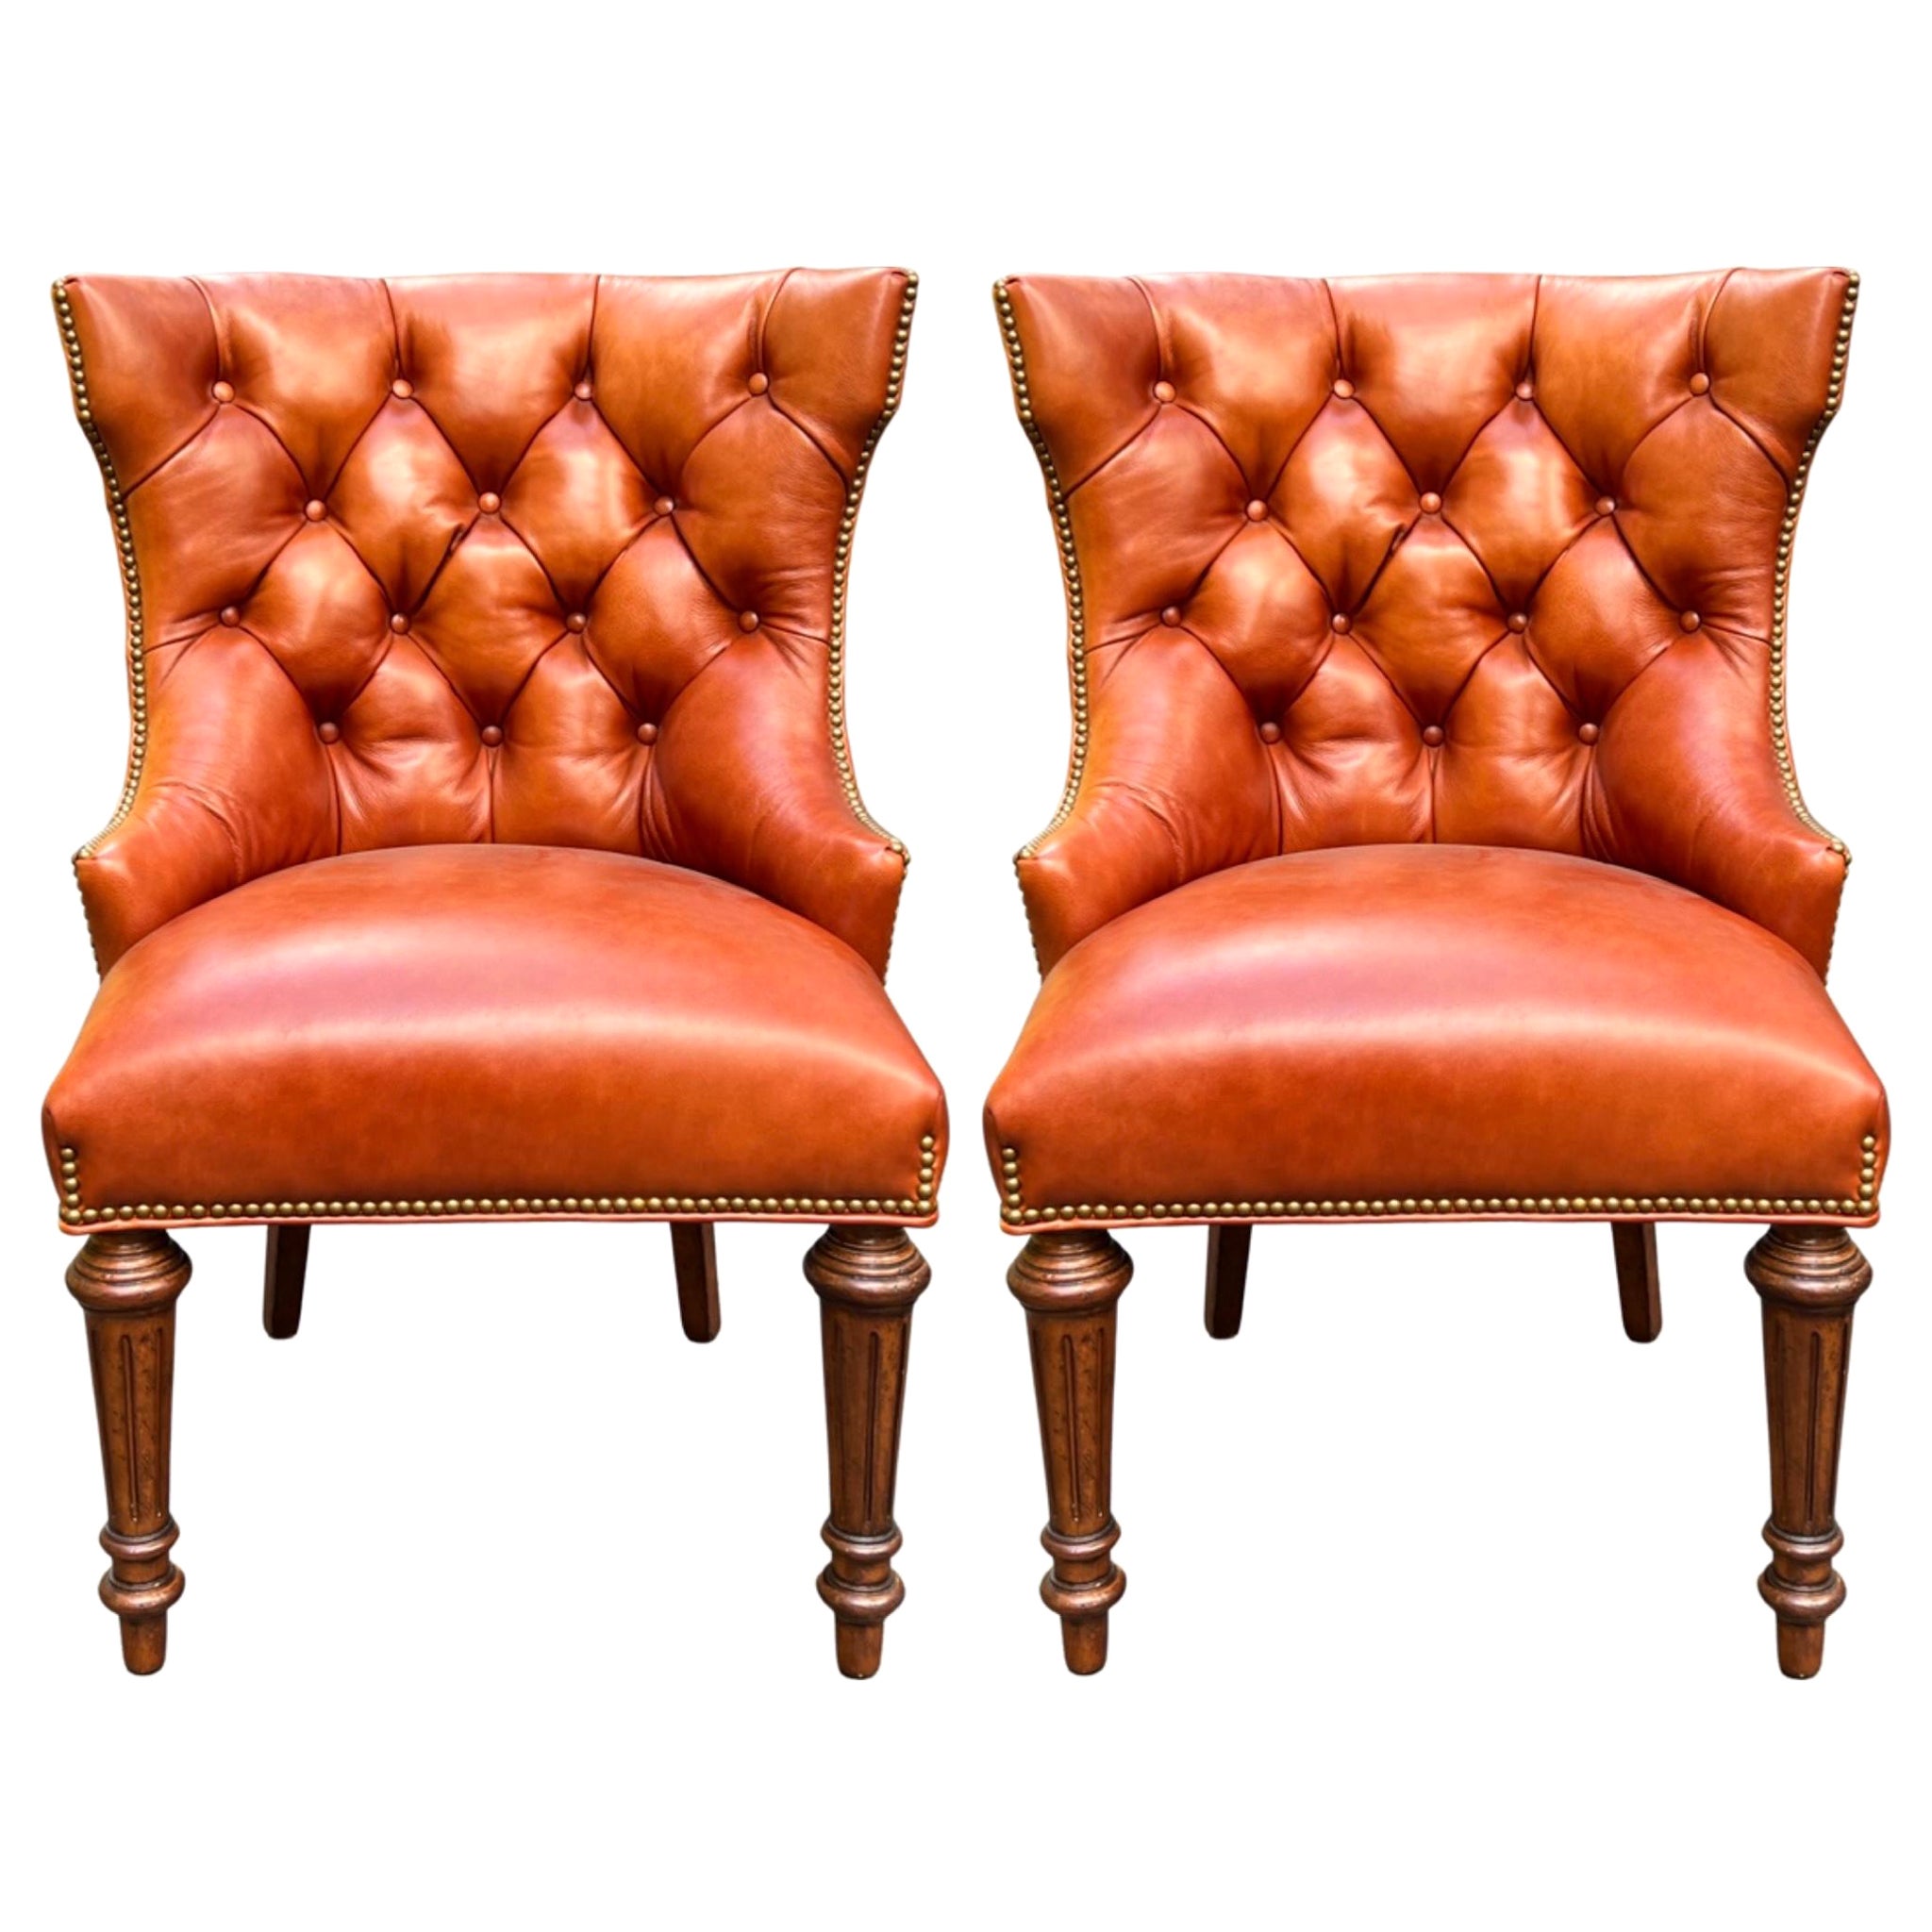 Late 20th-C. Chesterfield Style Leather Chairs Att. to Hancock and Moore, Pair For Sale